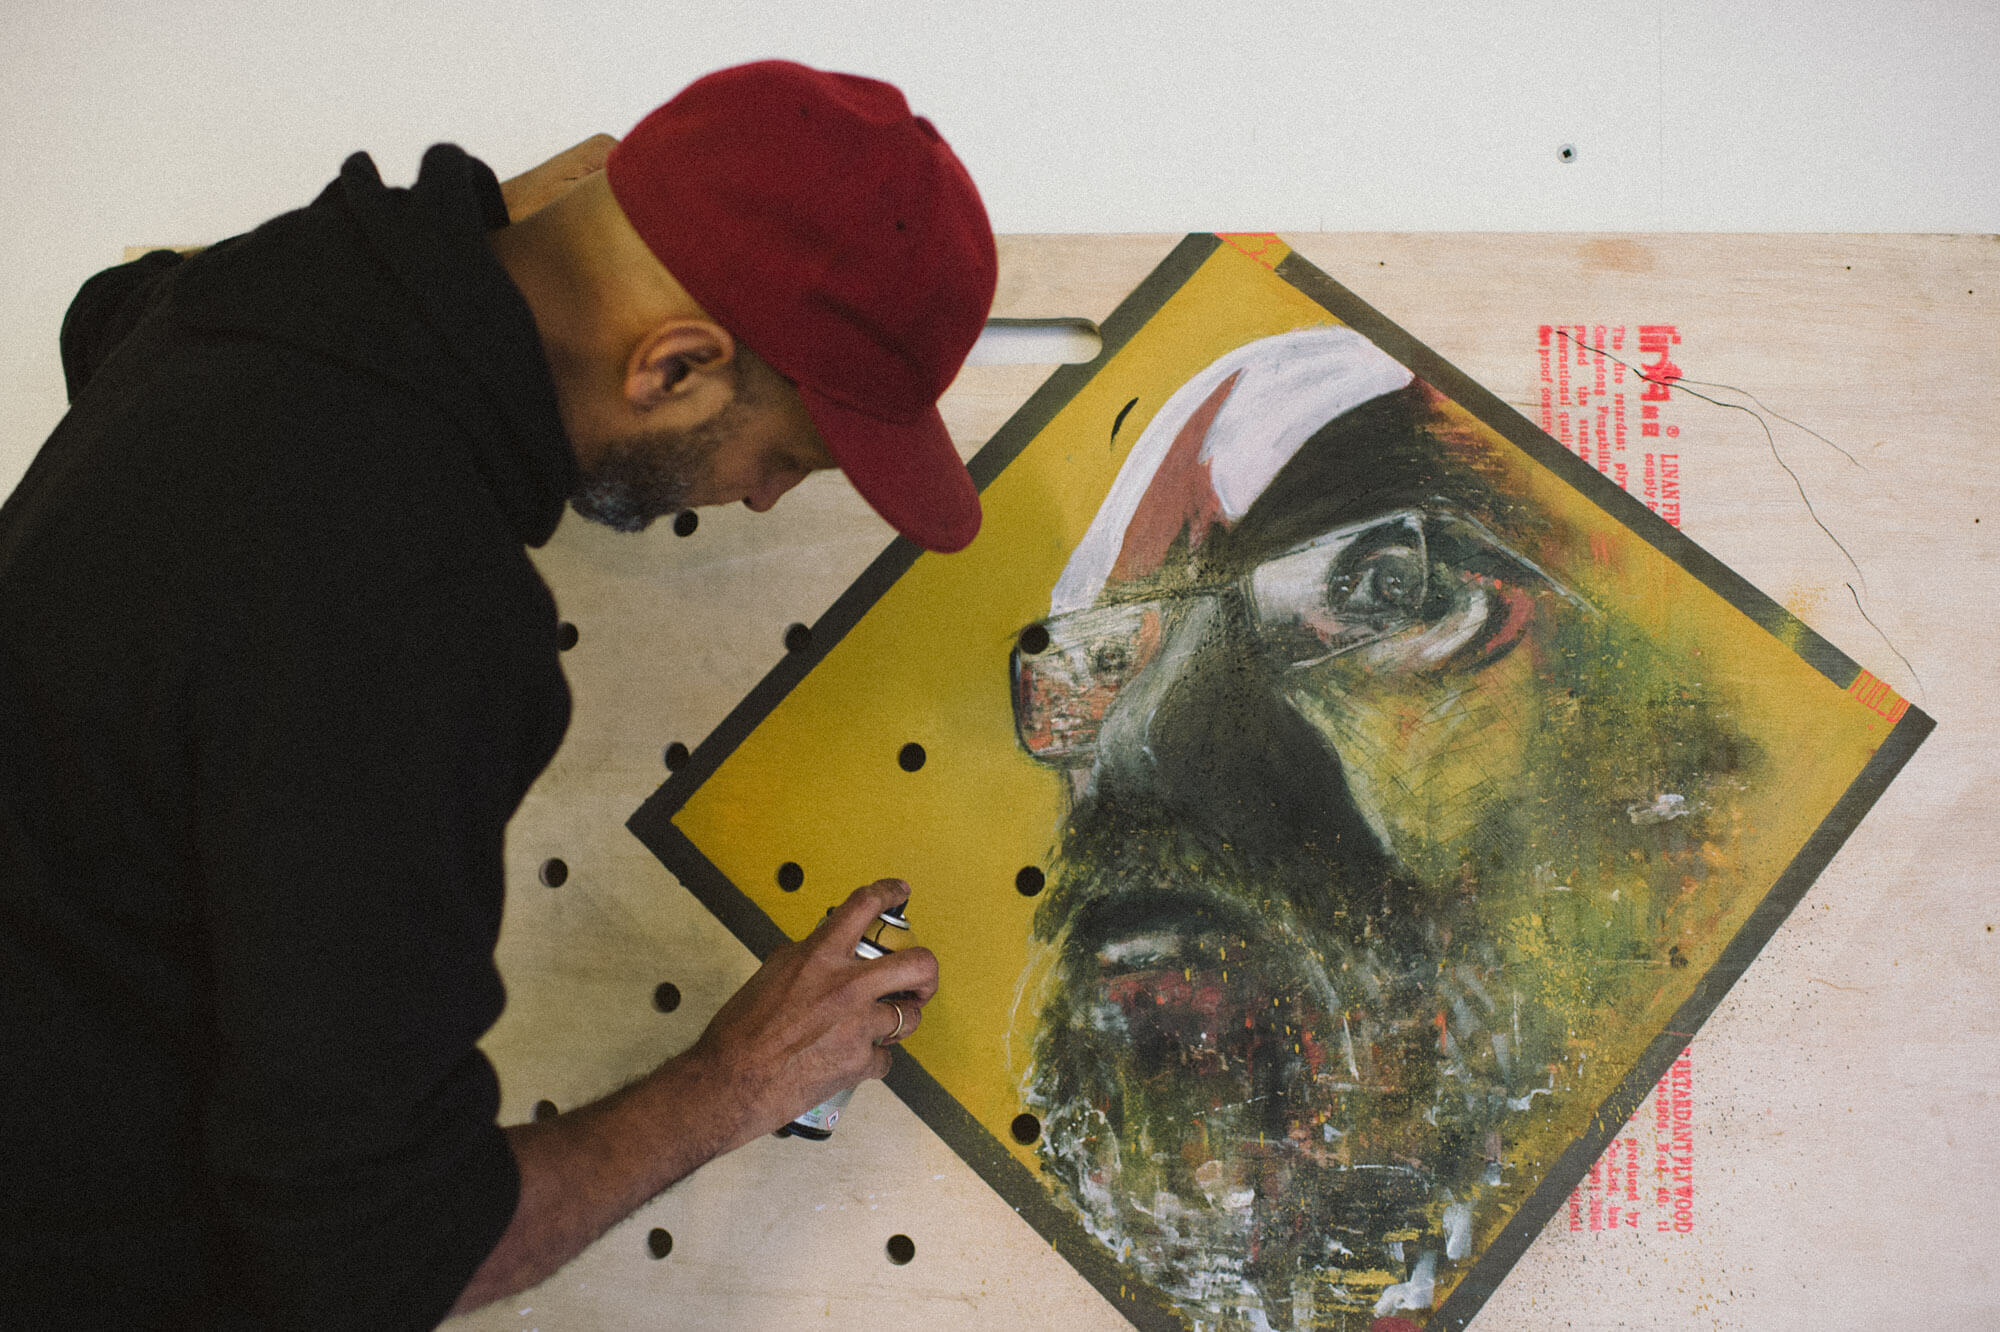 NIMI spraying on some yellow work with a face on